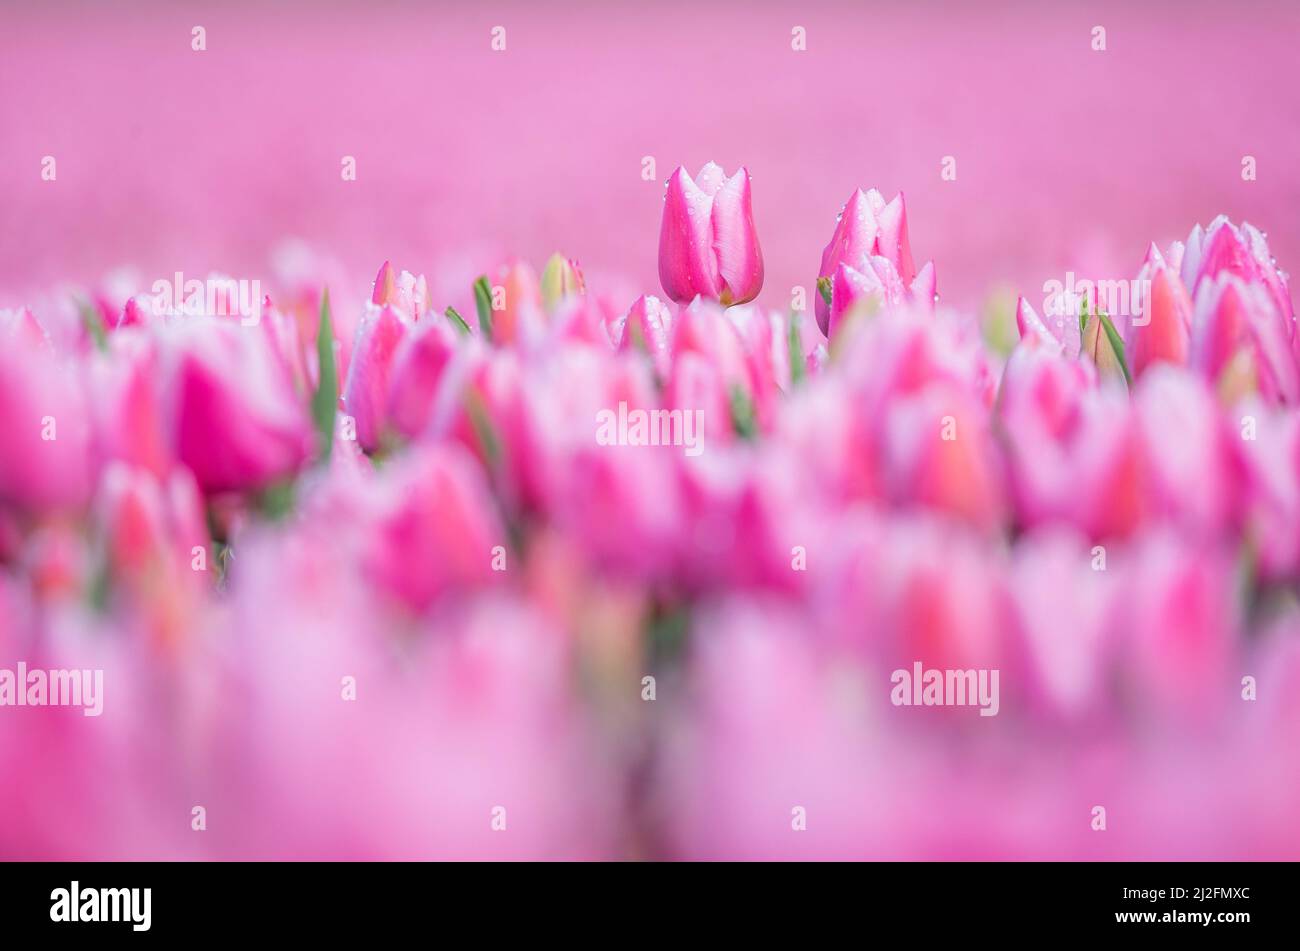 2022-03-31 08:10:03 31-03-2022, Zuid-Beijerland - Tulip fields in bloom on a field in Zuid-Beijerland. The tulips bloom early this year due to the beautiful sunny weather. Photo: ANP / Hollandse Hoogte / Jeffrey Groeneweg netherlands out - belgium out Stock Photo